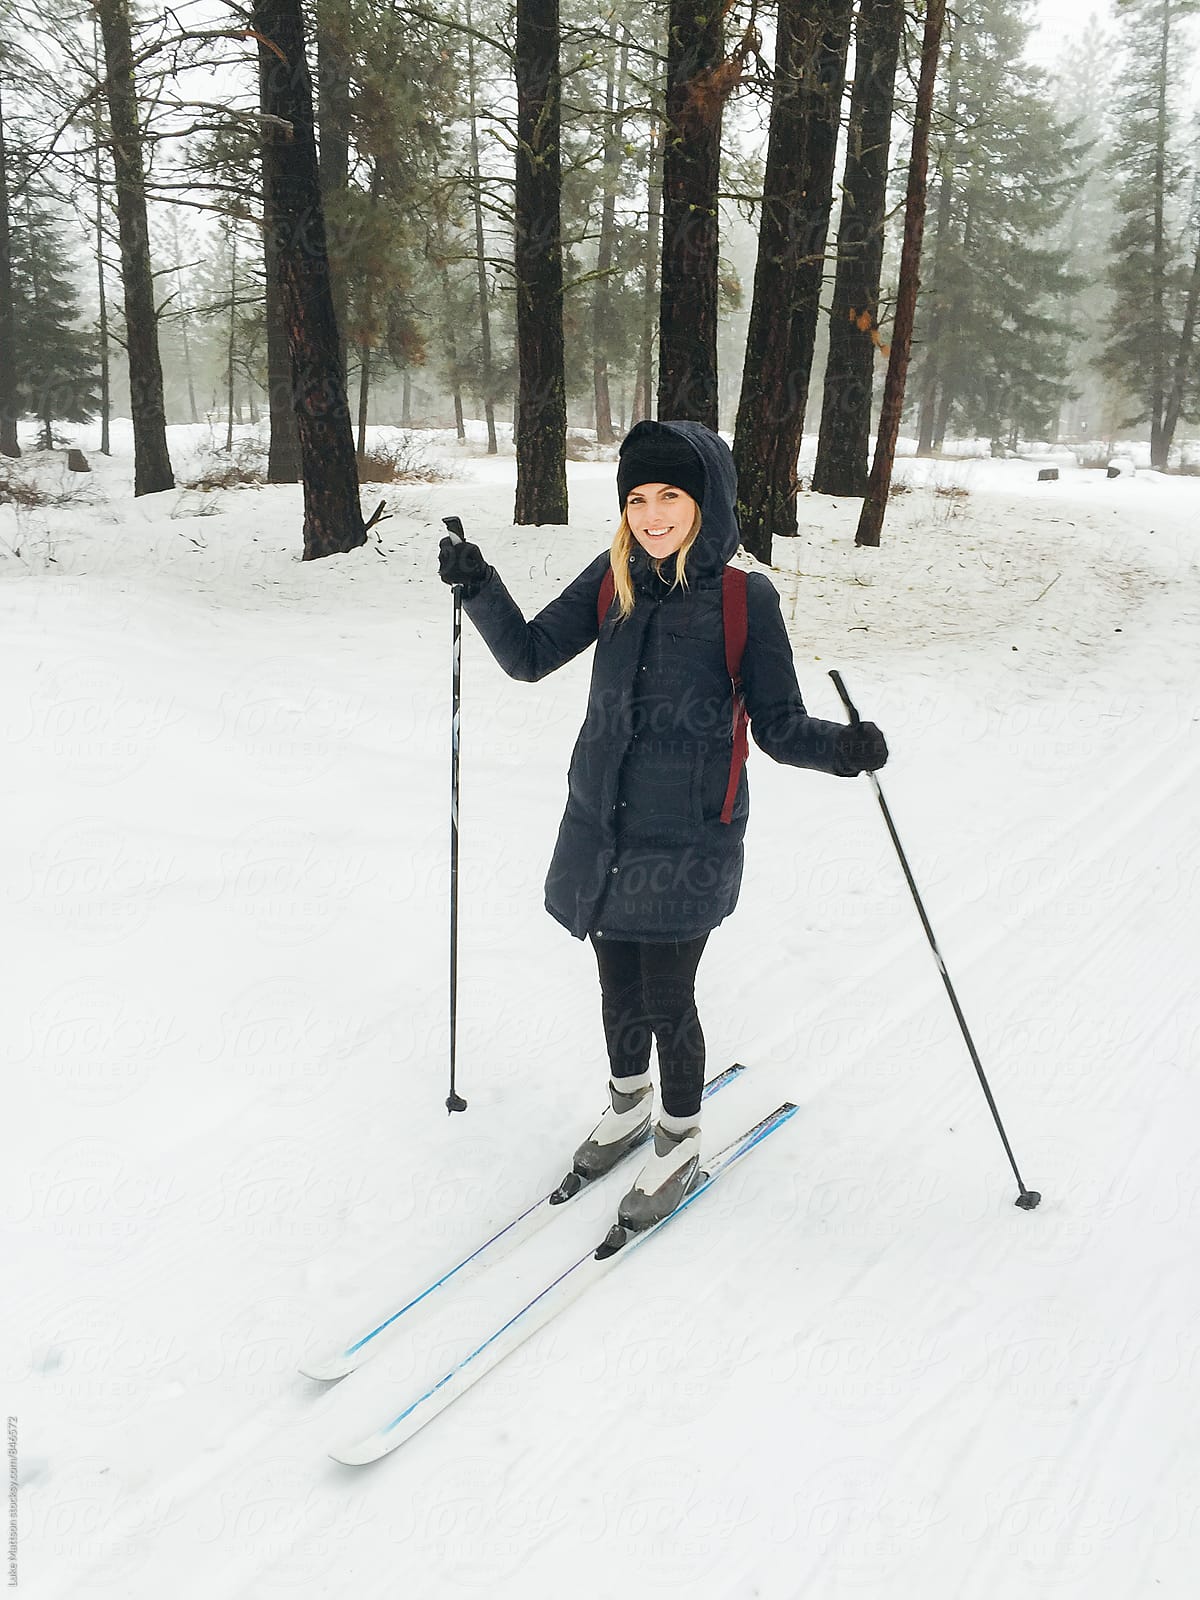 Smiling Young Blonde Woman Cross Country Skiing Along Snowy Trail Through Winter Forest